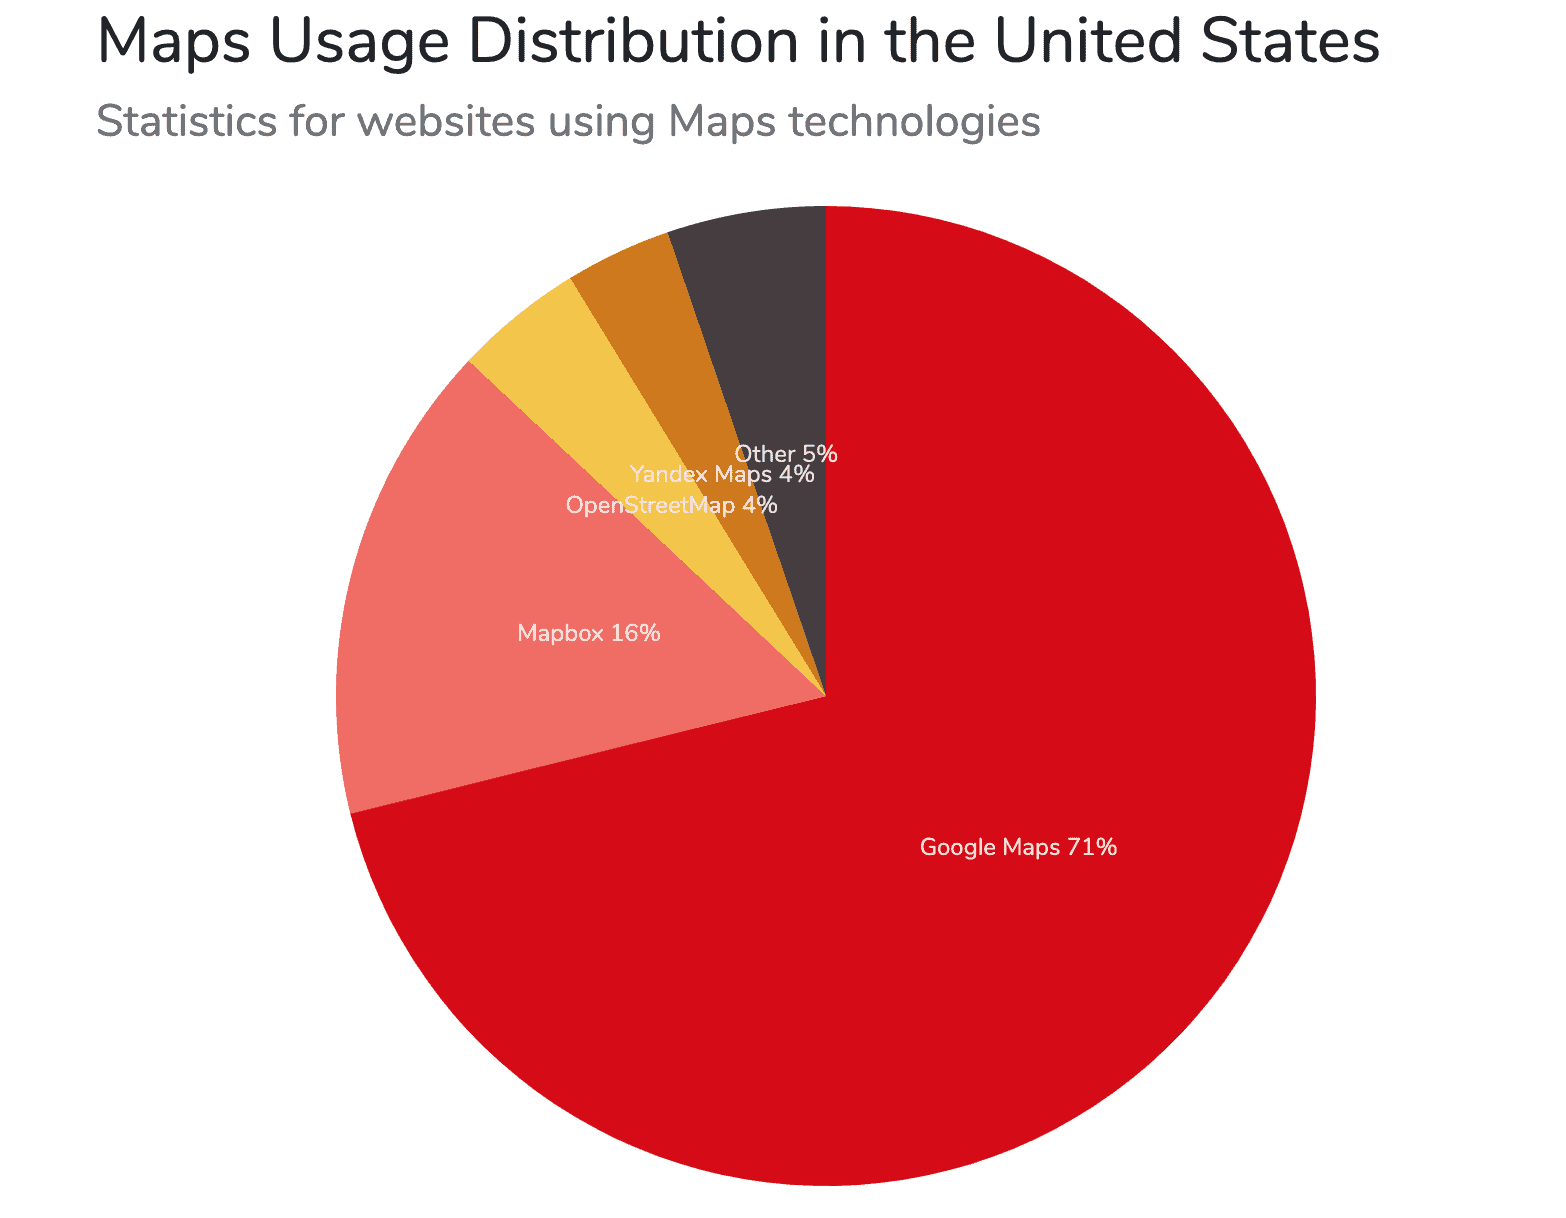 Google Maps Usage in the United States